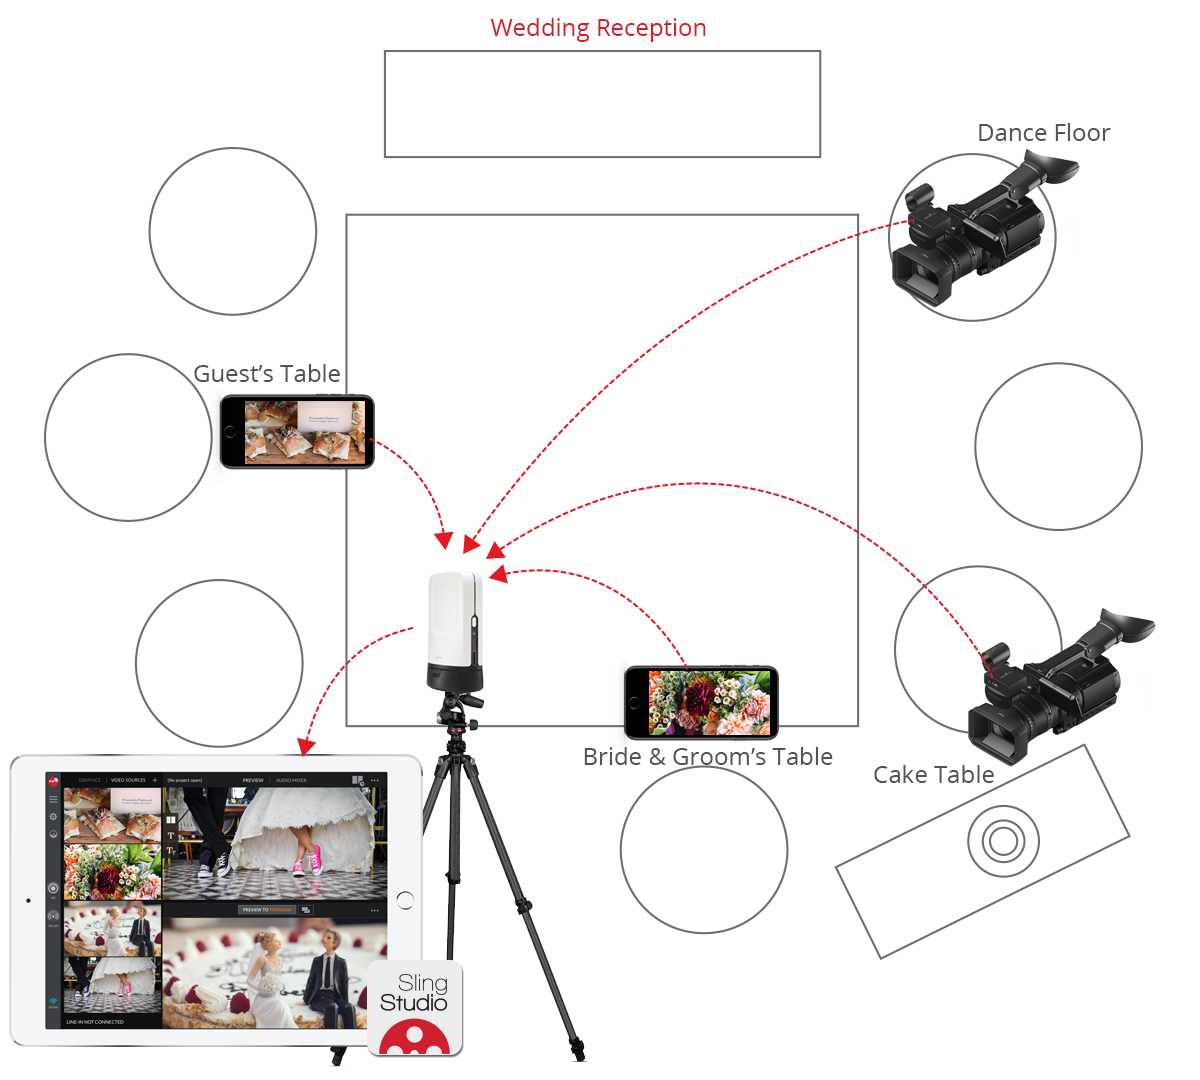 Diagram on how to live stream                                                                          wedding receptions for professional                                                                          videographers with SlingStudio                                                                          video switcher